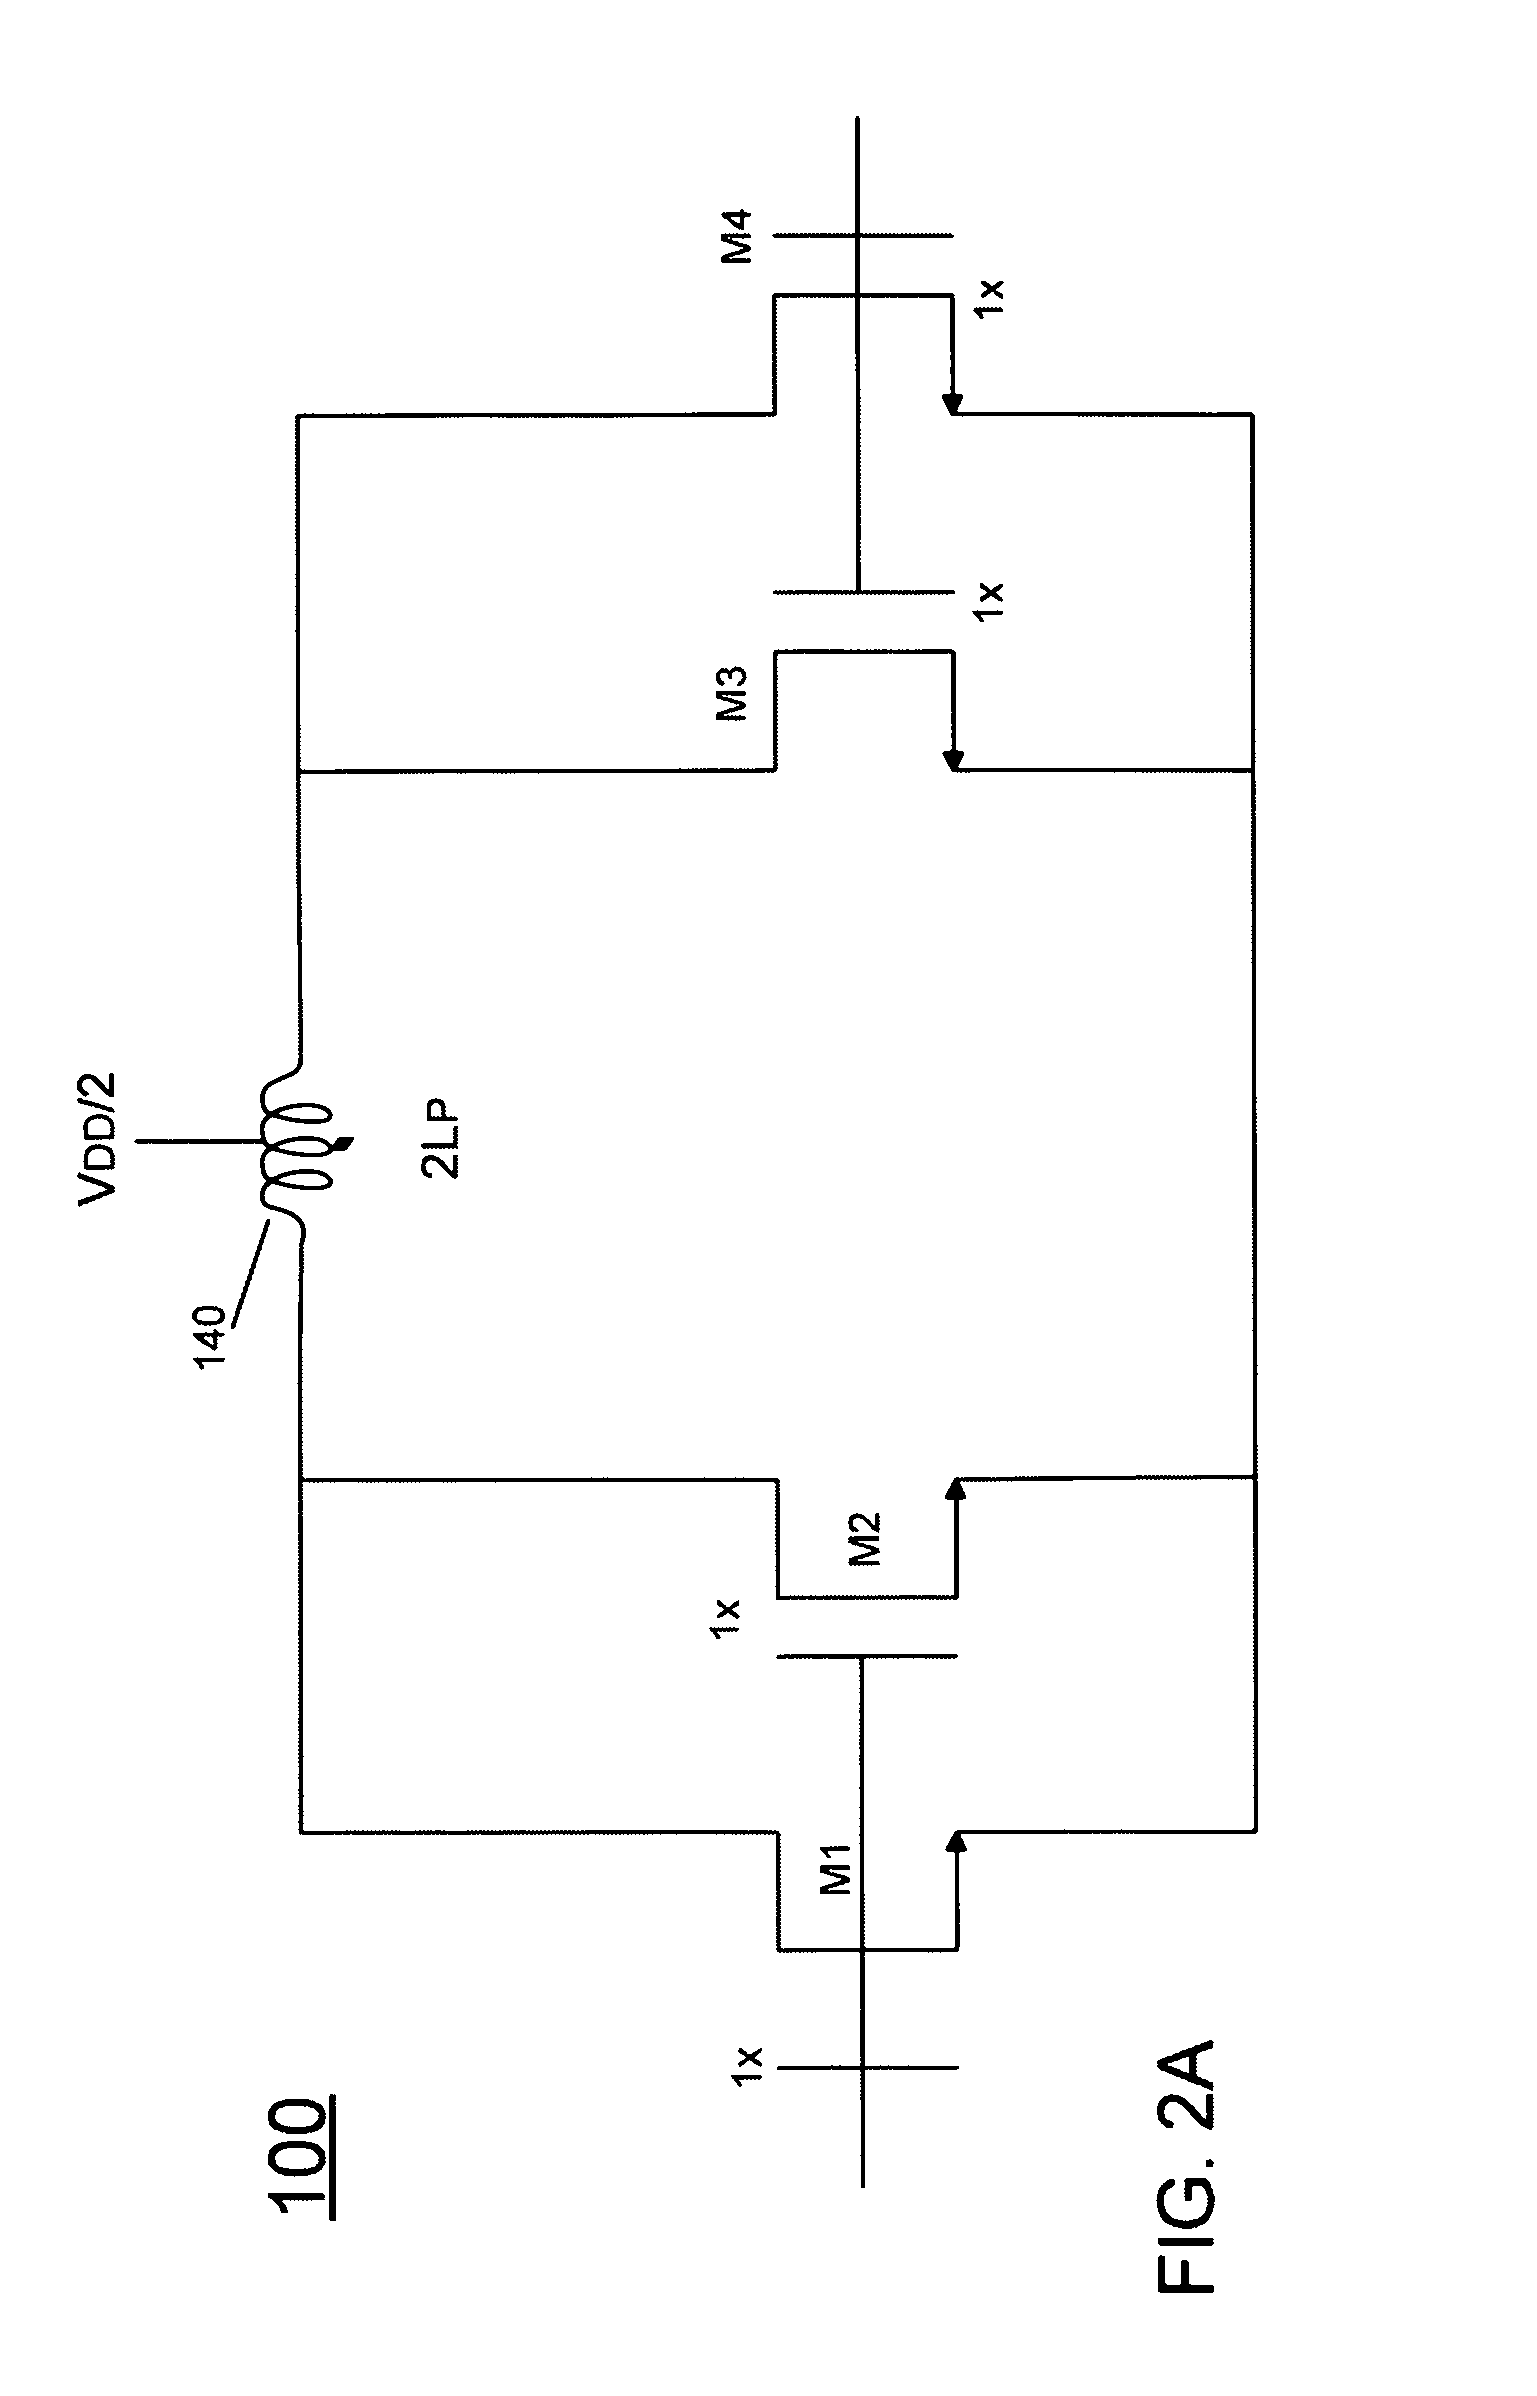 Output gain stage for a power amplifier